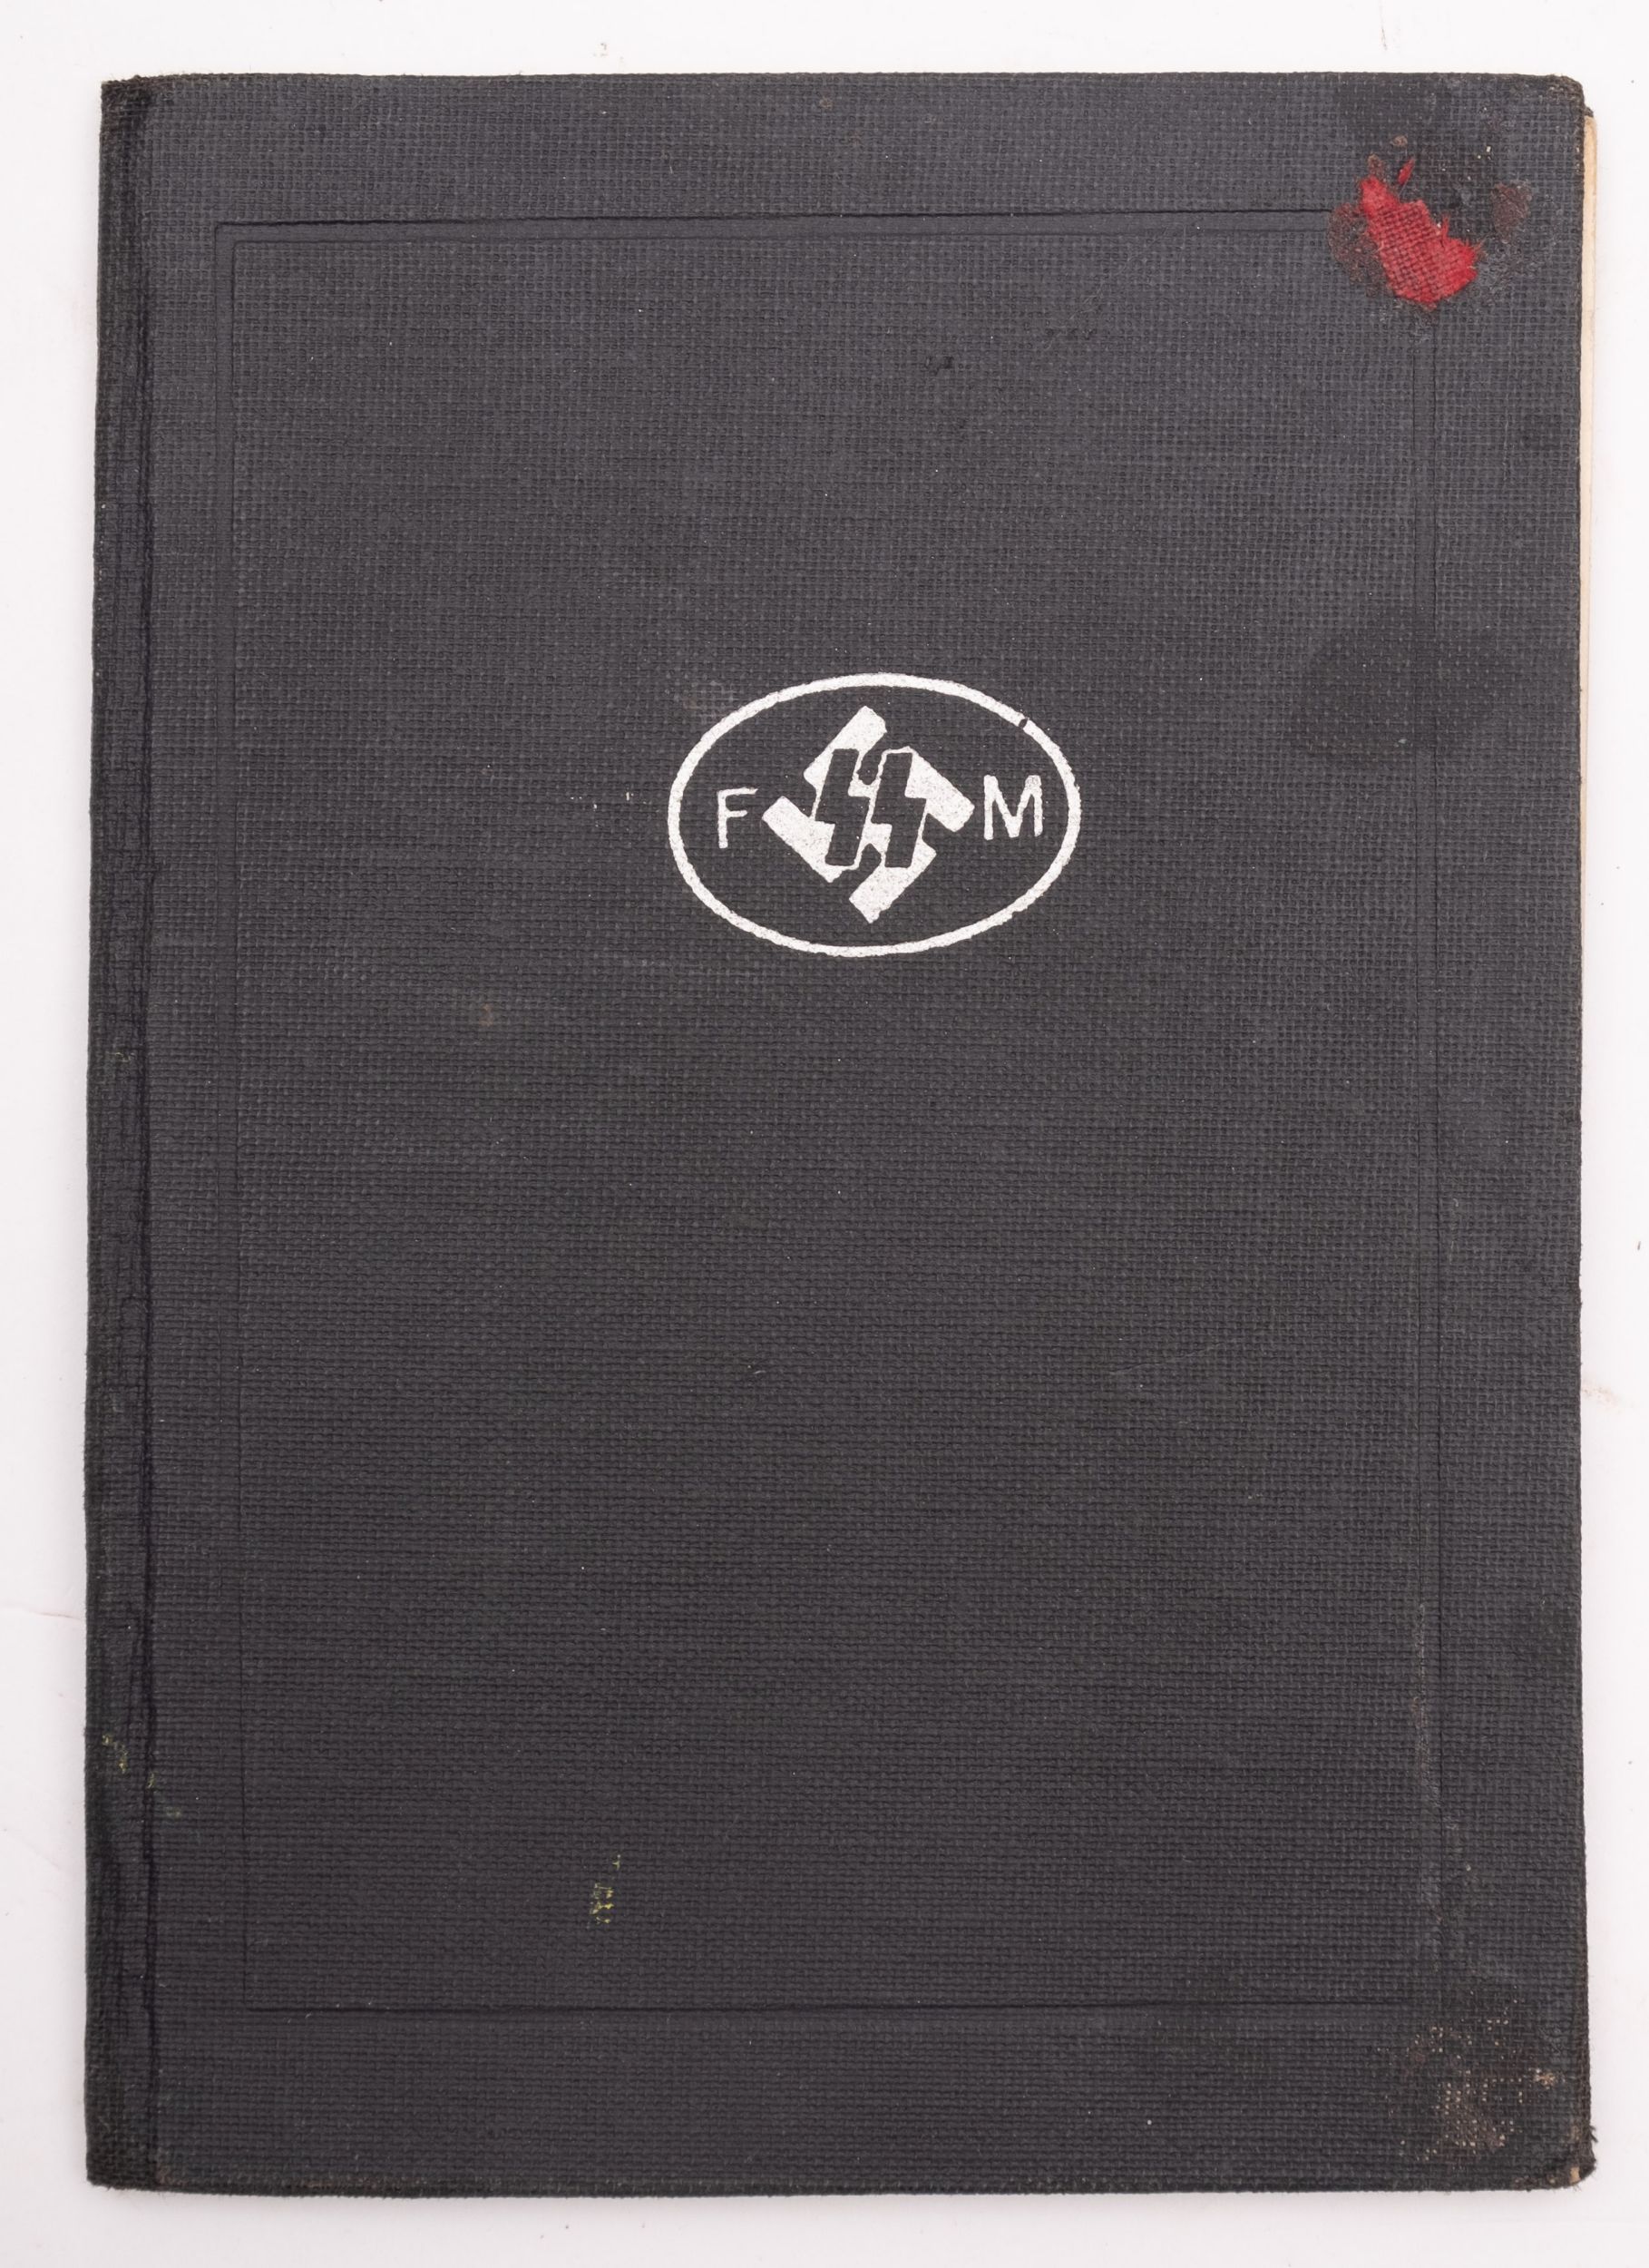 A WWII German NSDAP members handbook, dated 9 August, 1933 No 142816, black cloth stamped boards.